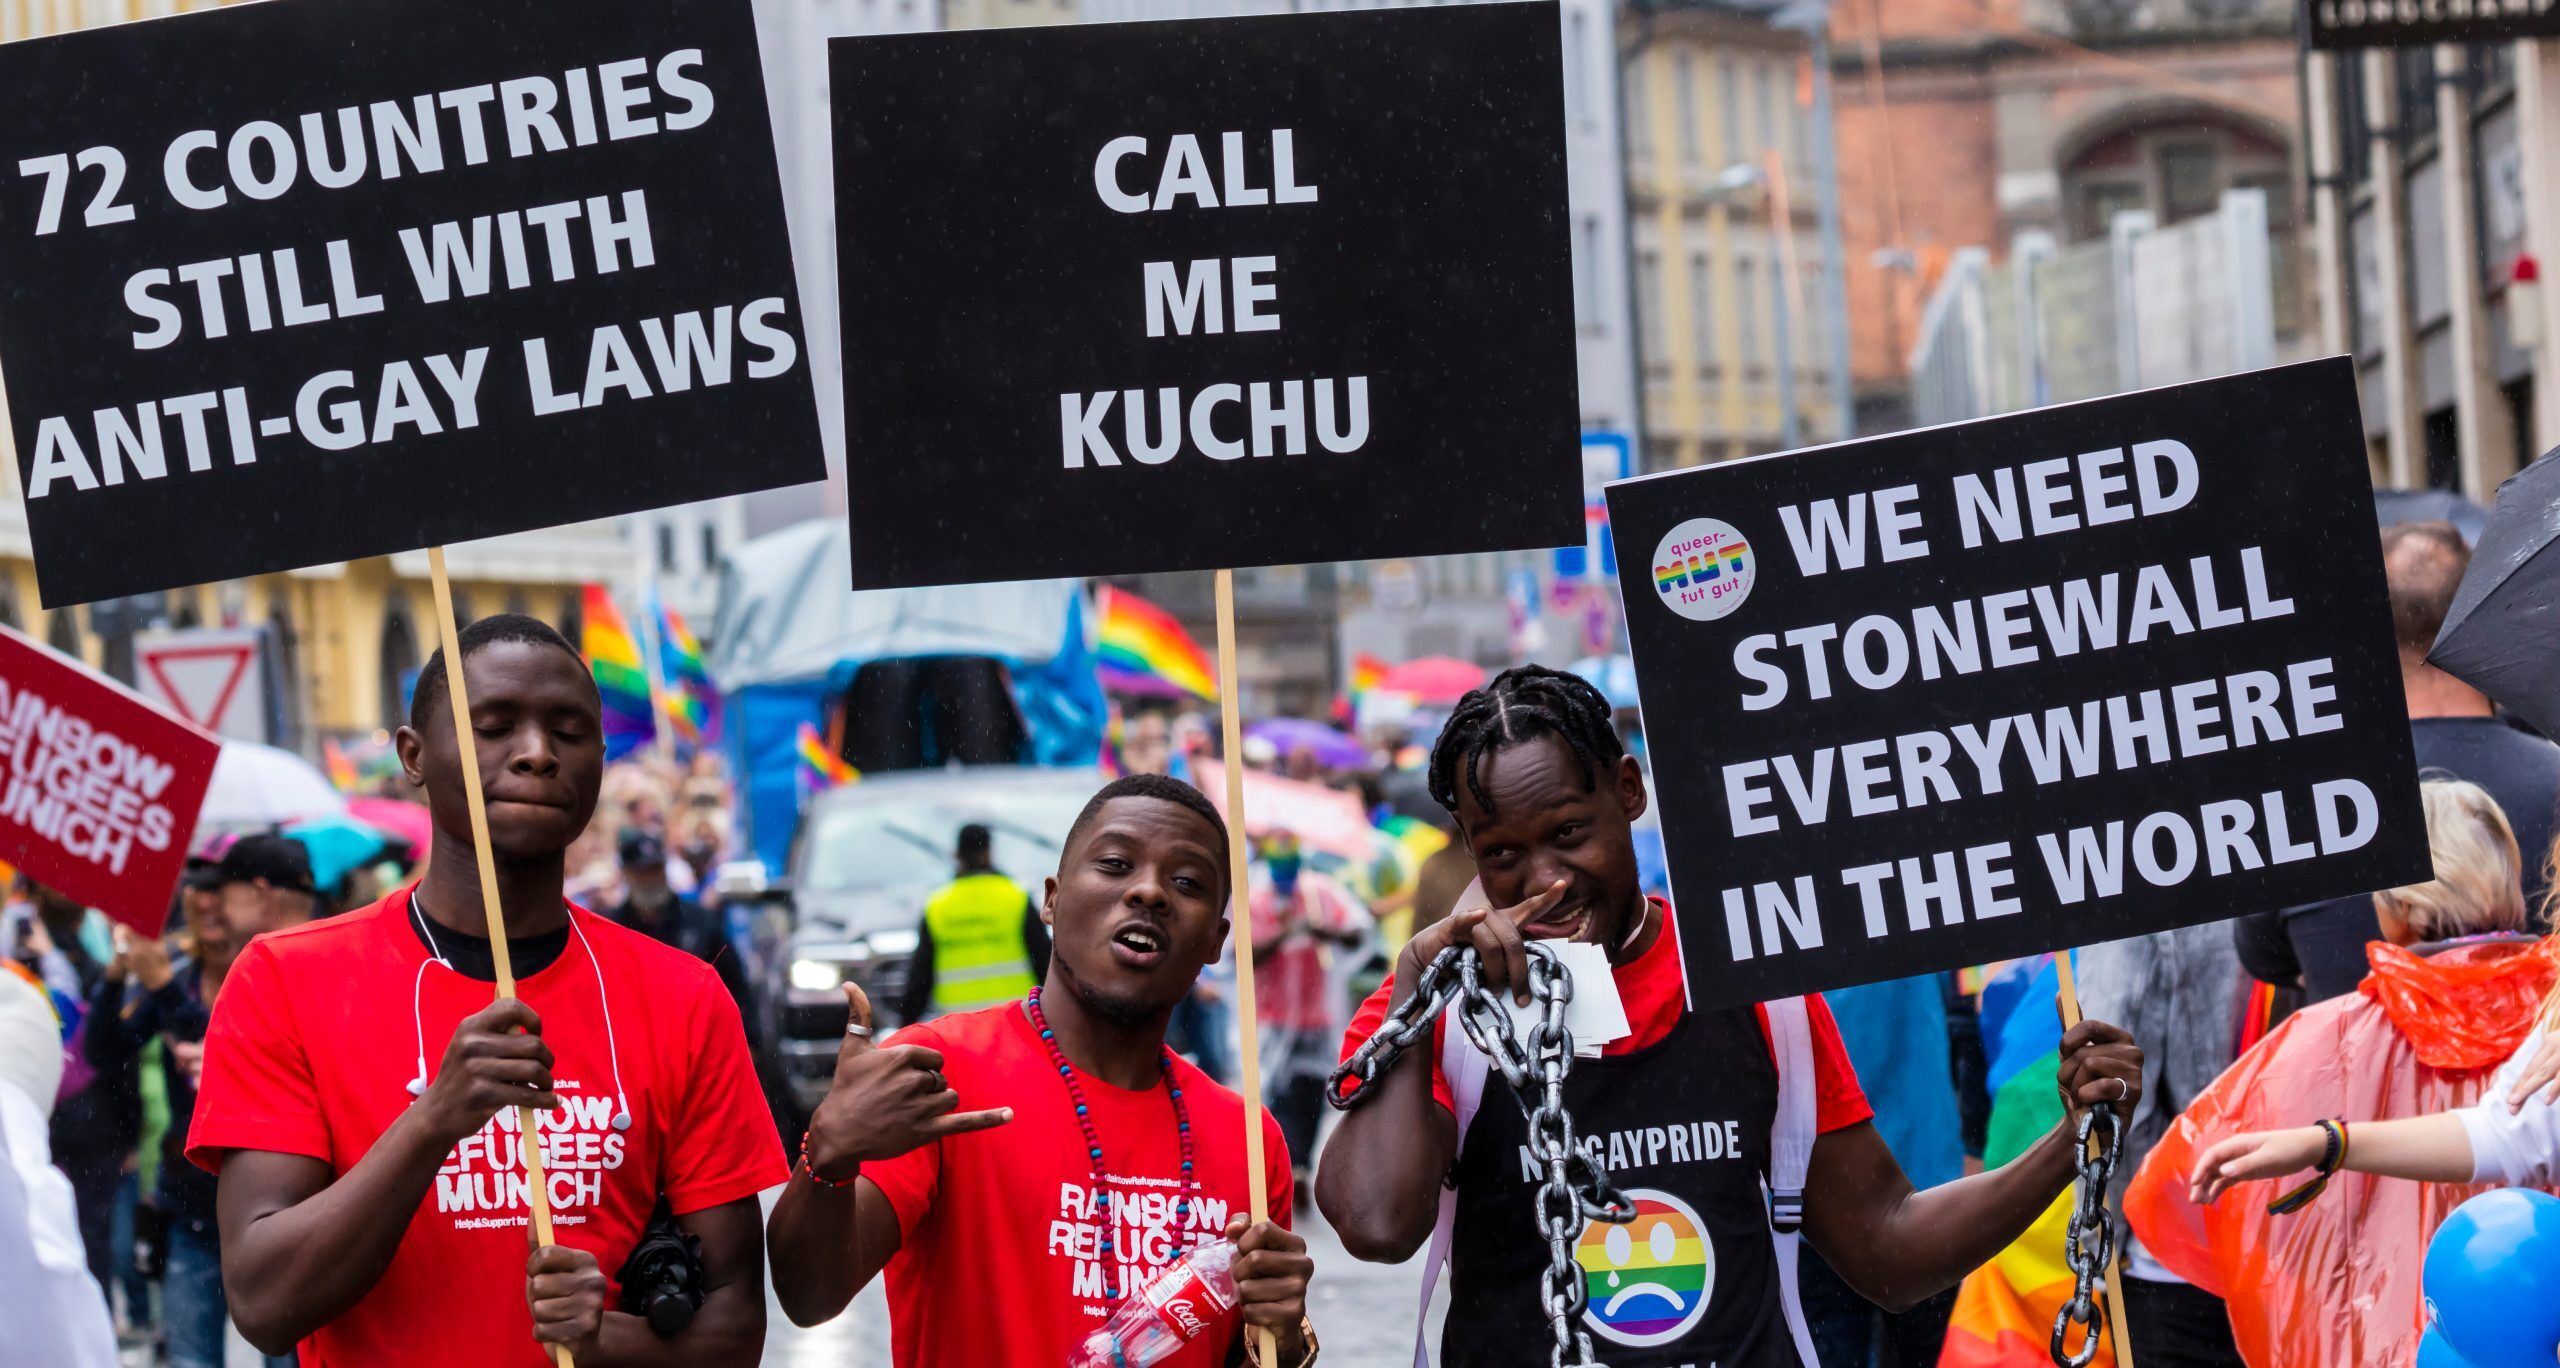 JULY 13, 2019: Munich rainbow refugees attending the Gay Pride parade also known as Christopher Street Day (CSD) in Munich, Germany.